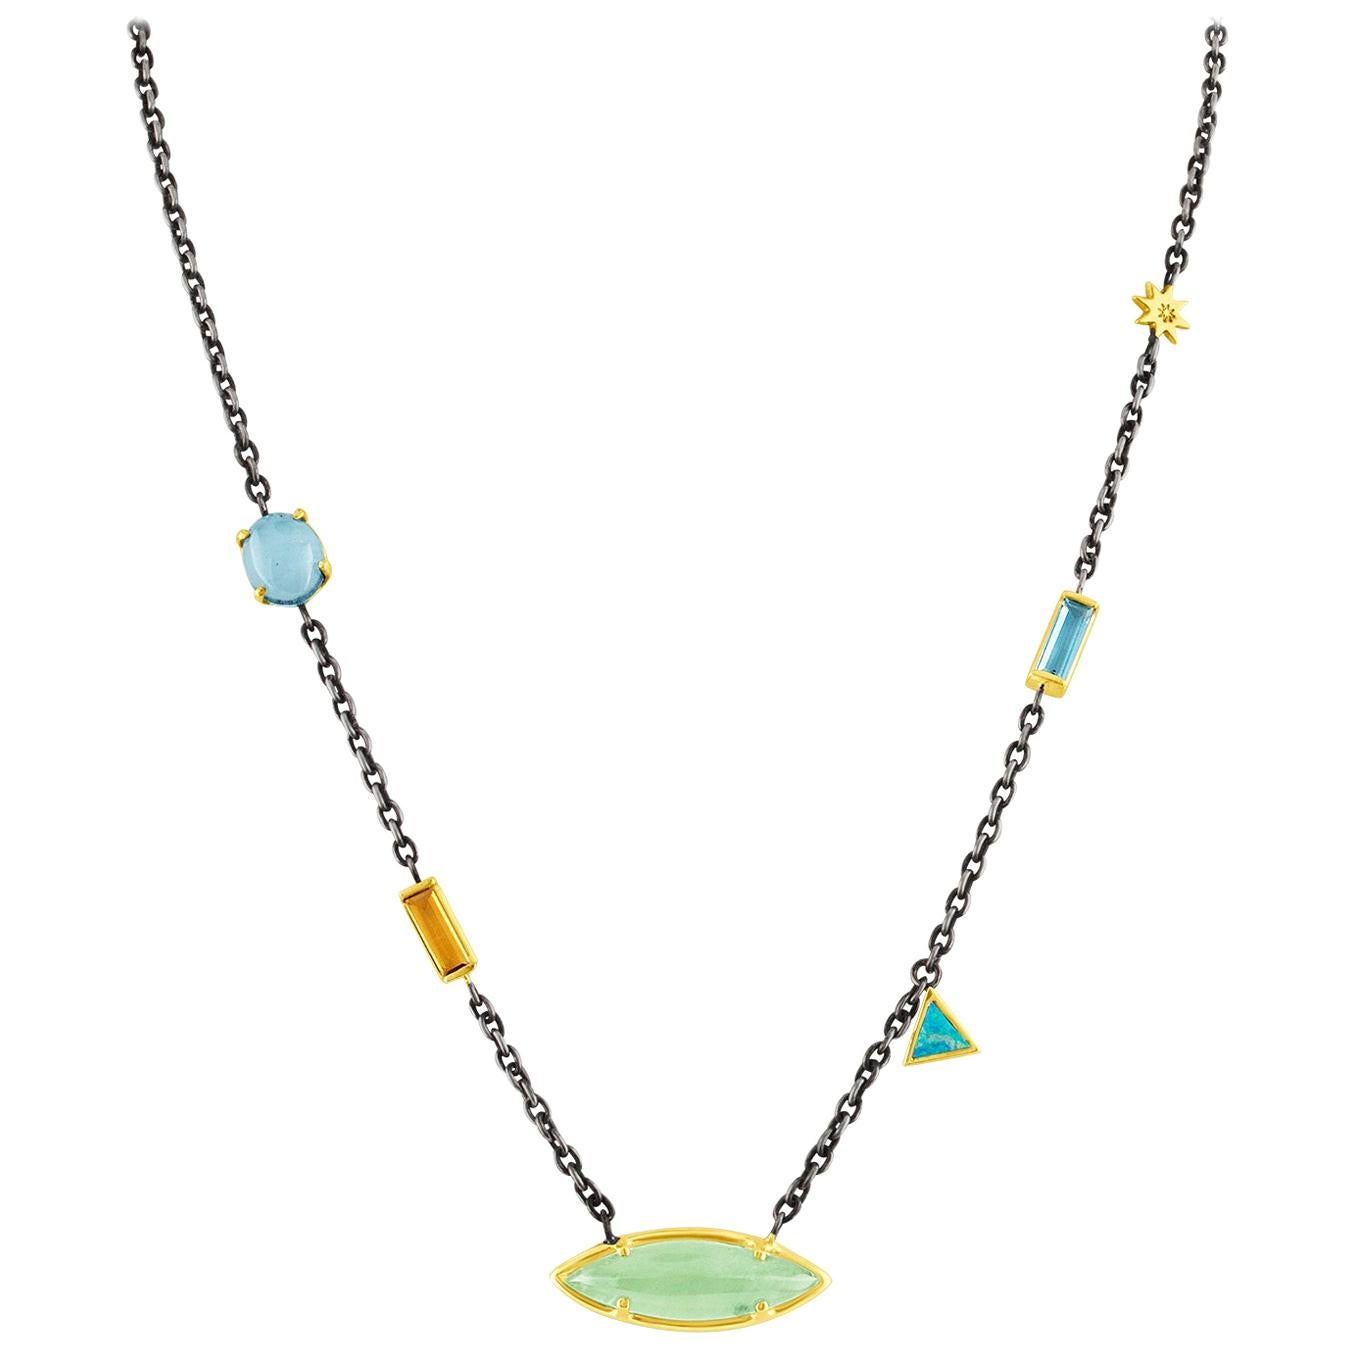 Silver and Gold Chain Necklace with Aquamarine, Blue Topaz, Citrine & Opal For Sale